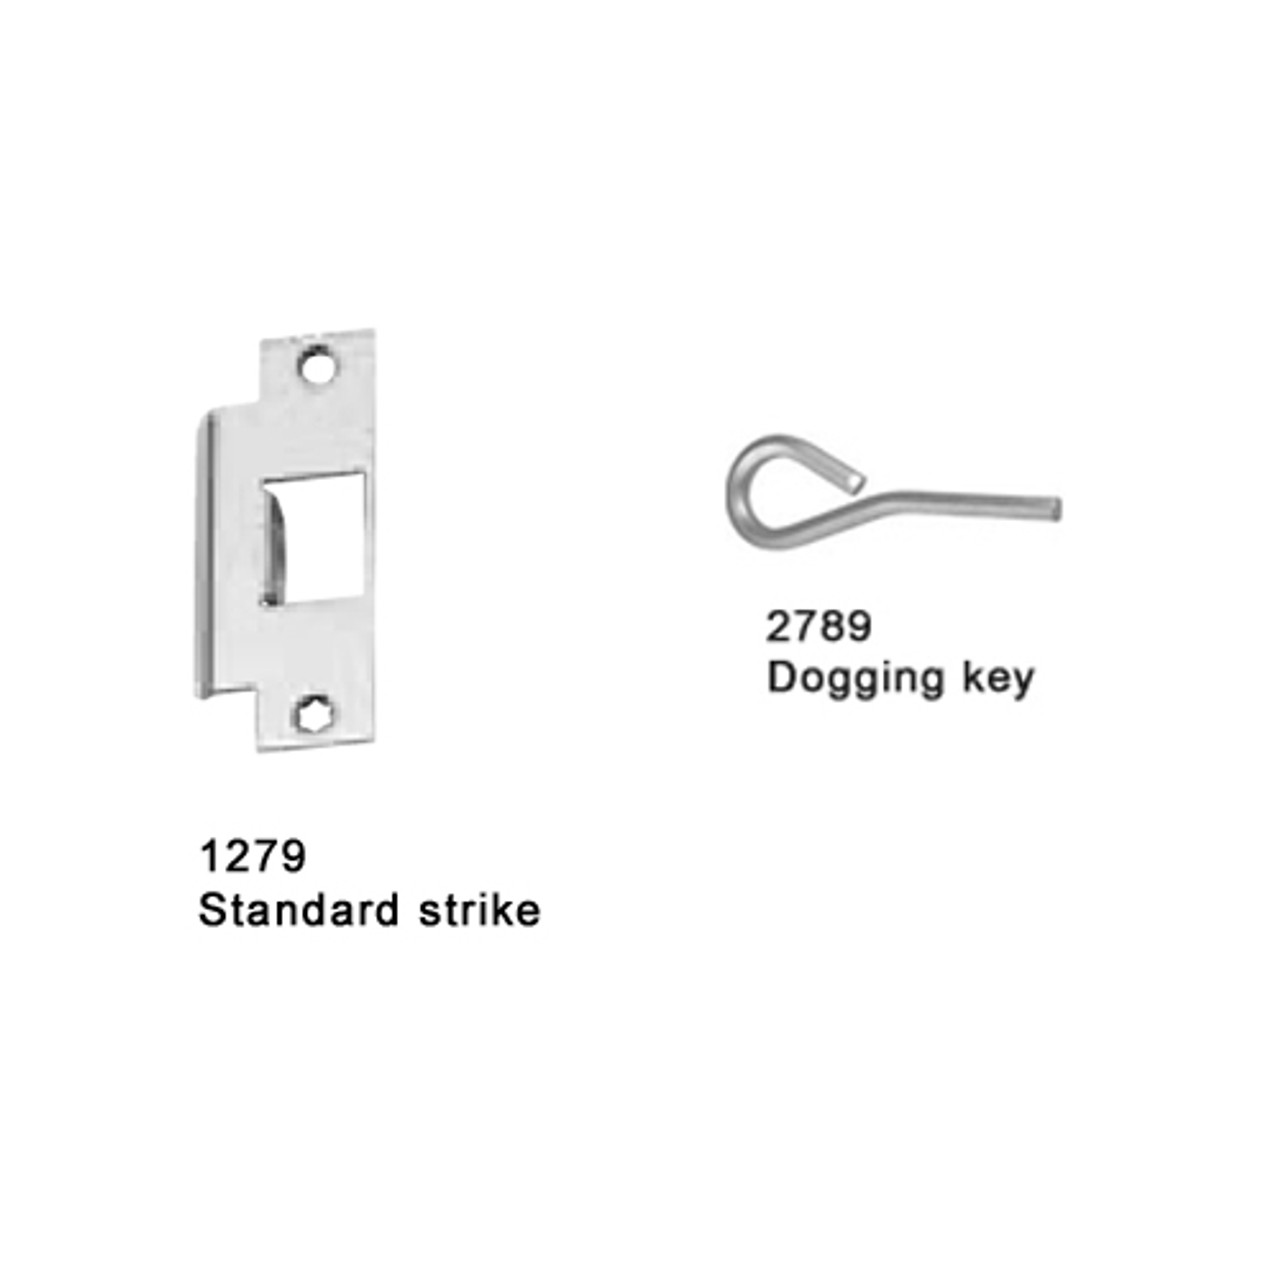 25-M-L-NL-DANE-US26-4-RHR Falcon 25 Series Mortise Lock Devices 510L-NL Dane Lever Trim with Night Latch in Polished Chrome